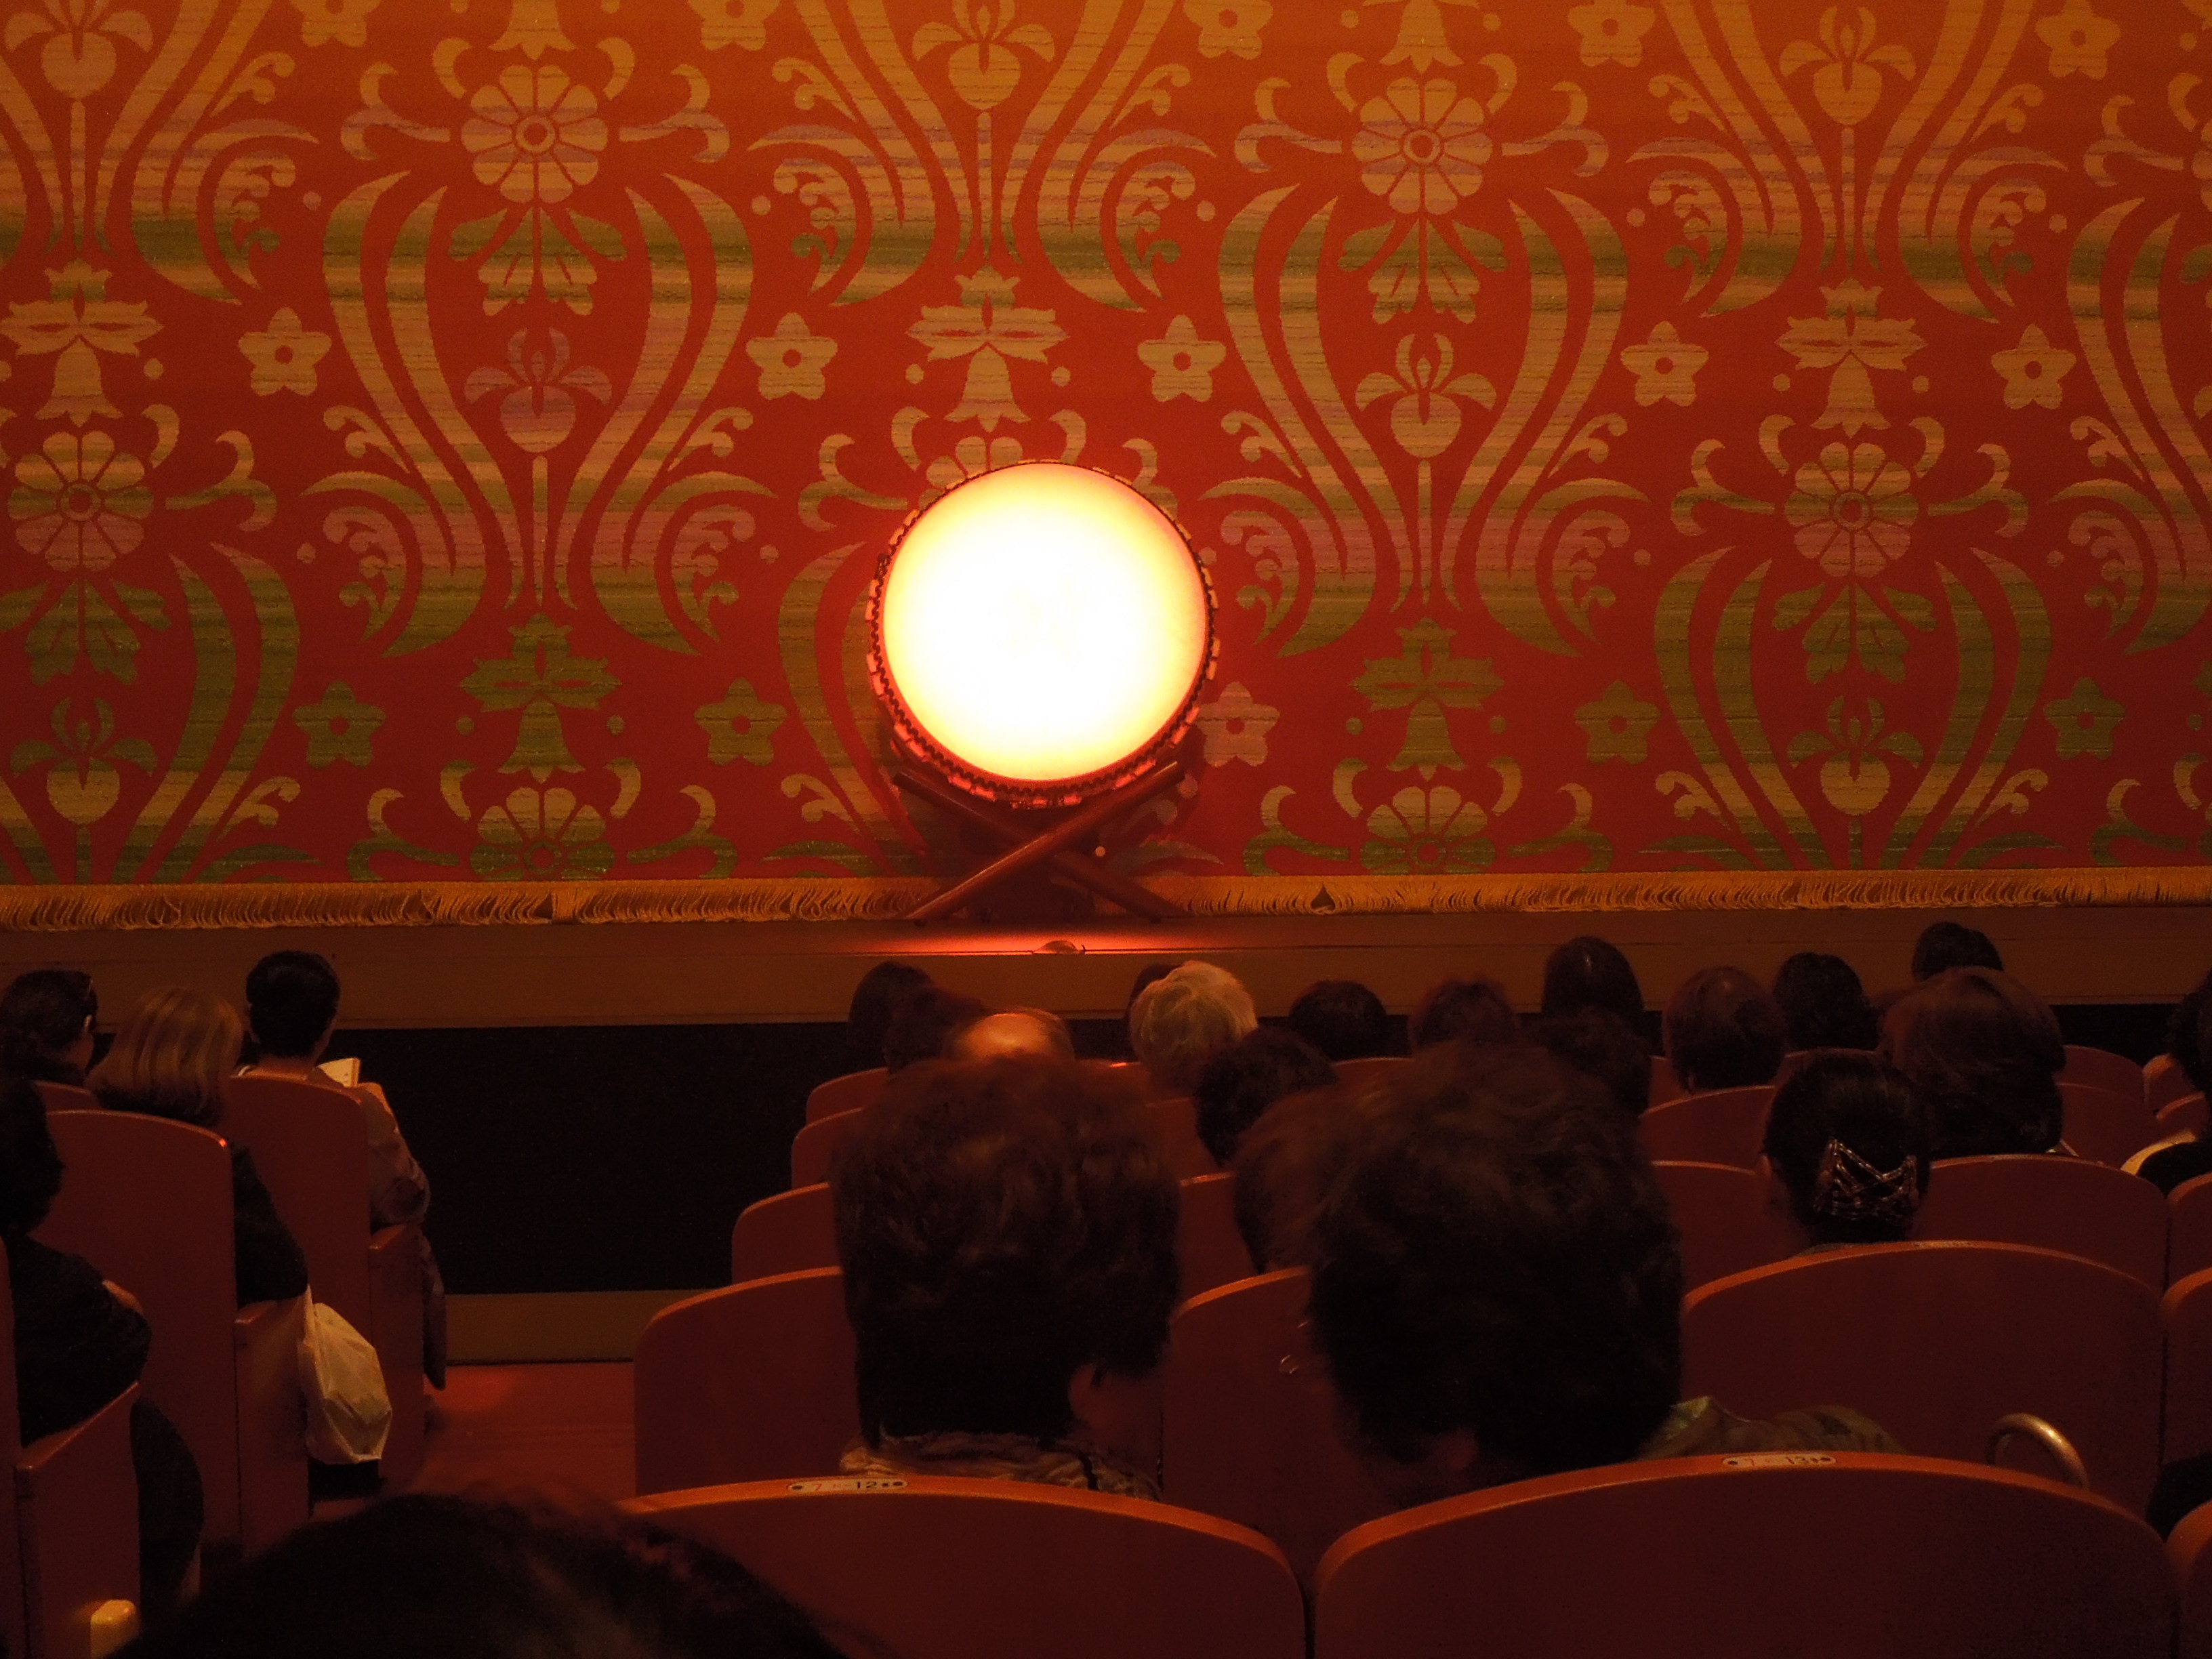 Clever lighting effect created this round drum-sun-mirror preceding the production